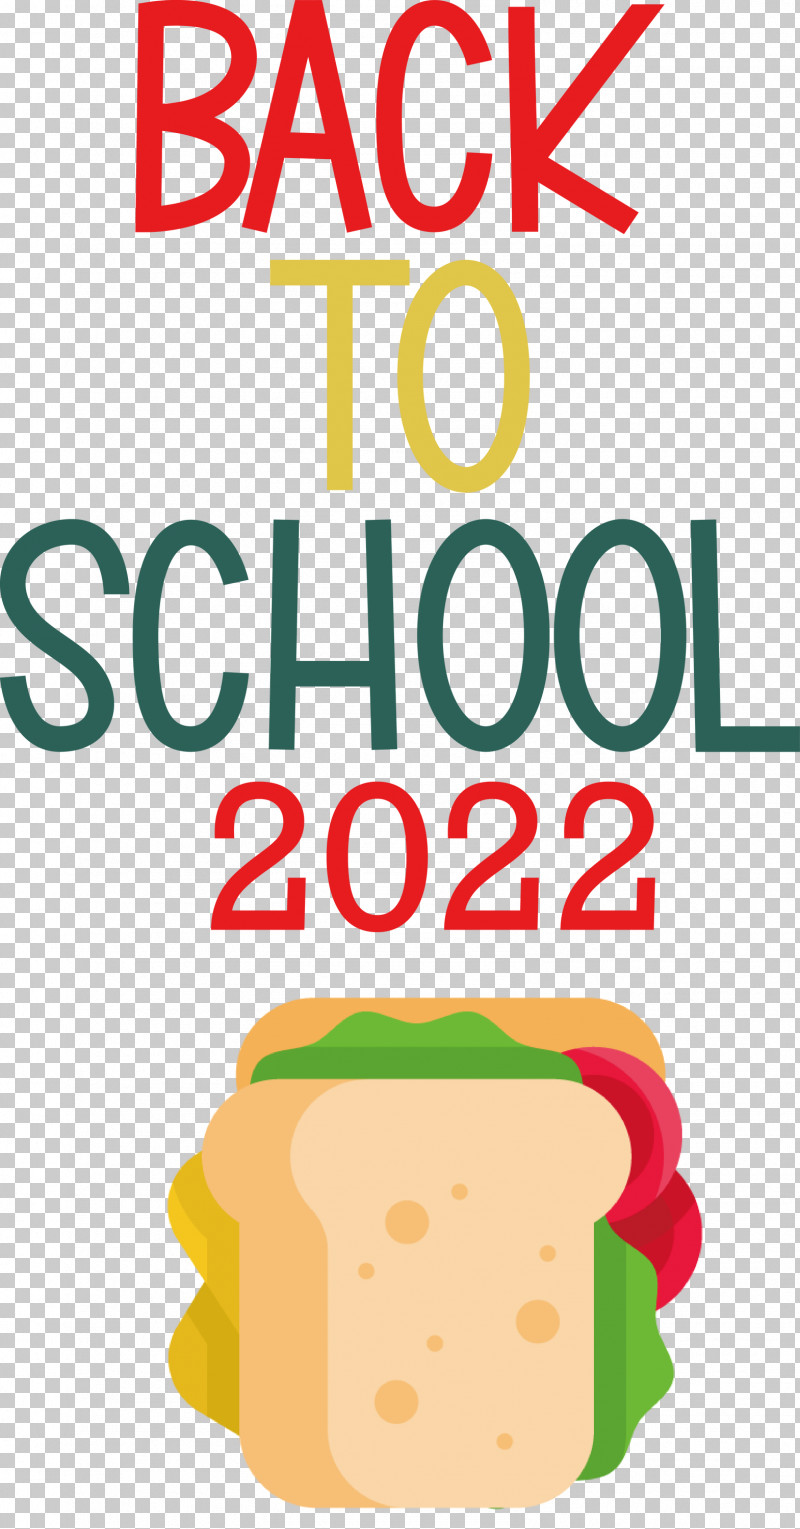 Back To School 2022 Education PNG, Clipart, Behavior, Education, Geometry, Human, Line Free PNG Download